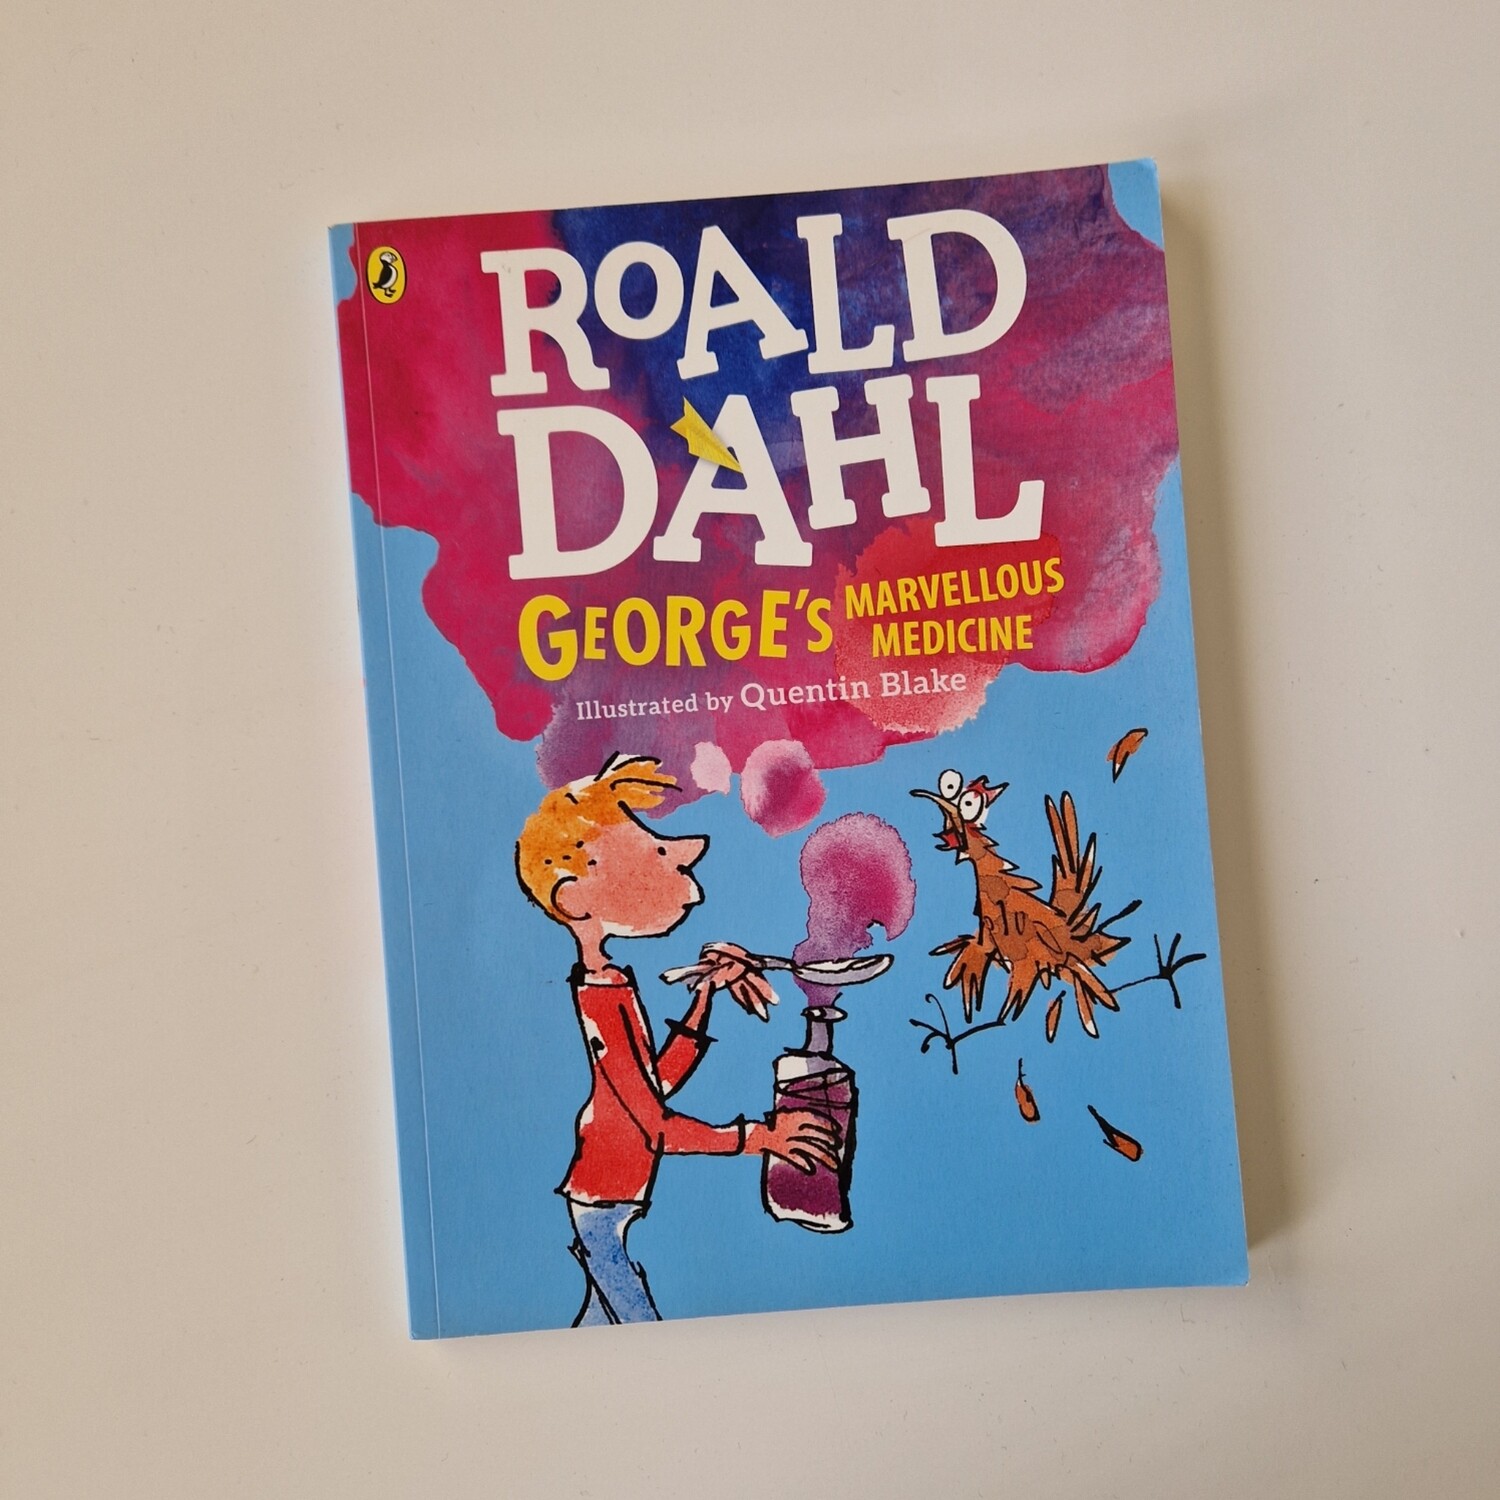 Roald Dahl - George's Marvellous Medicine Notebook - made from a paperback book